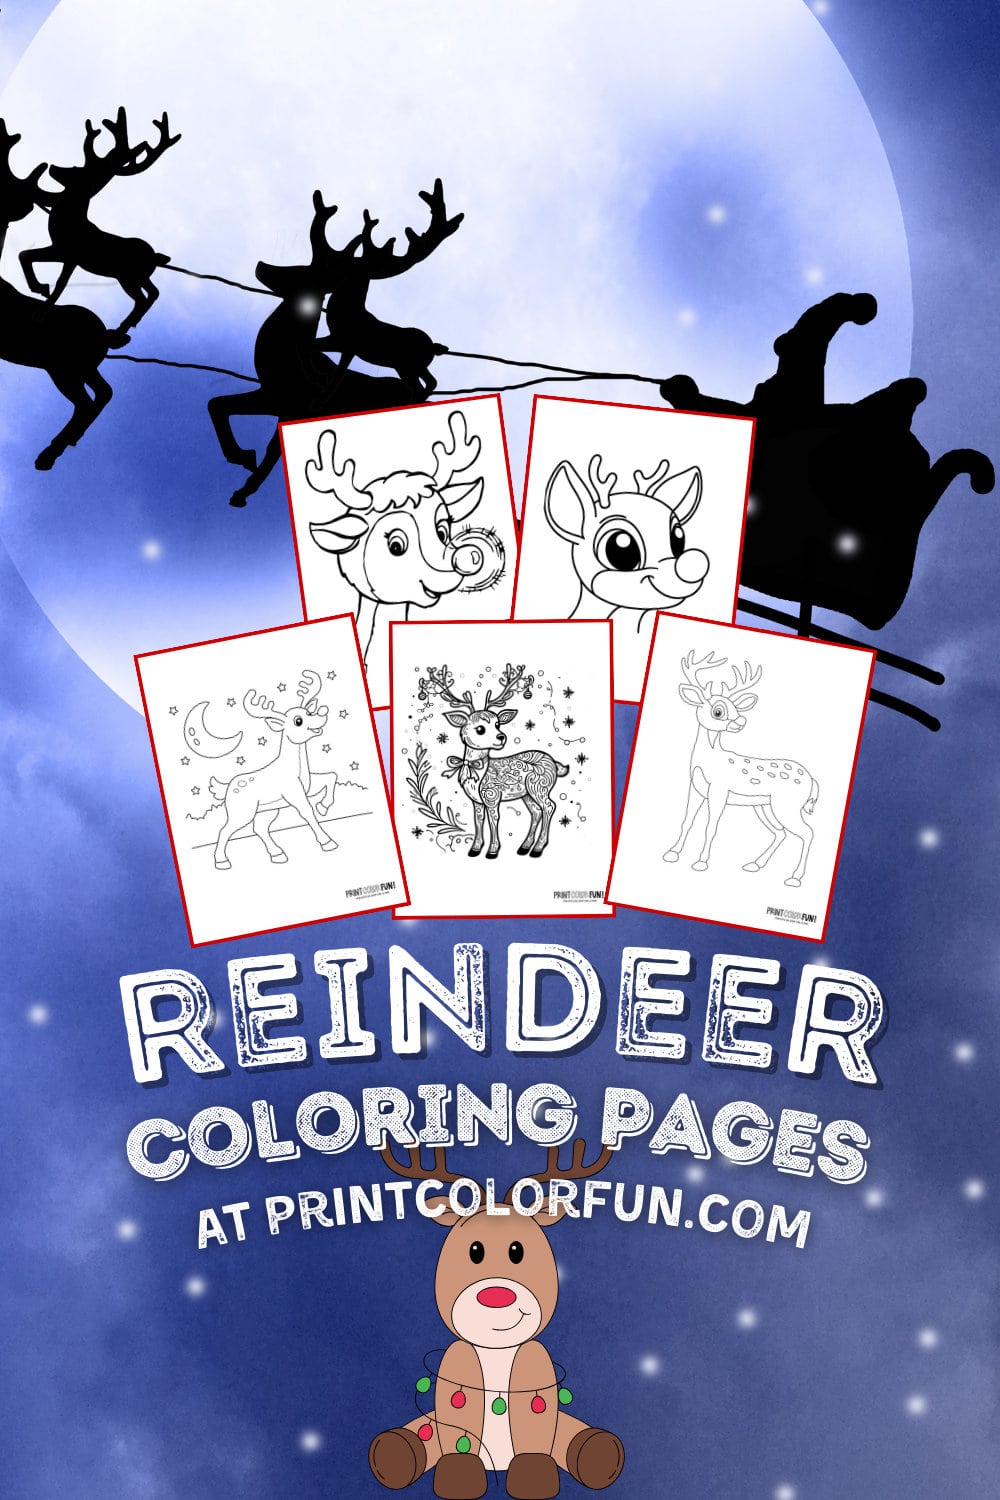 Reindeer and Rudolph Christmas coloring pages and clipart - PrintColorFun com Halloween coloring pages and clipart - PrintColorFun com